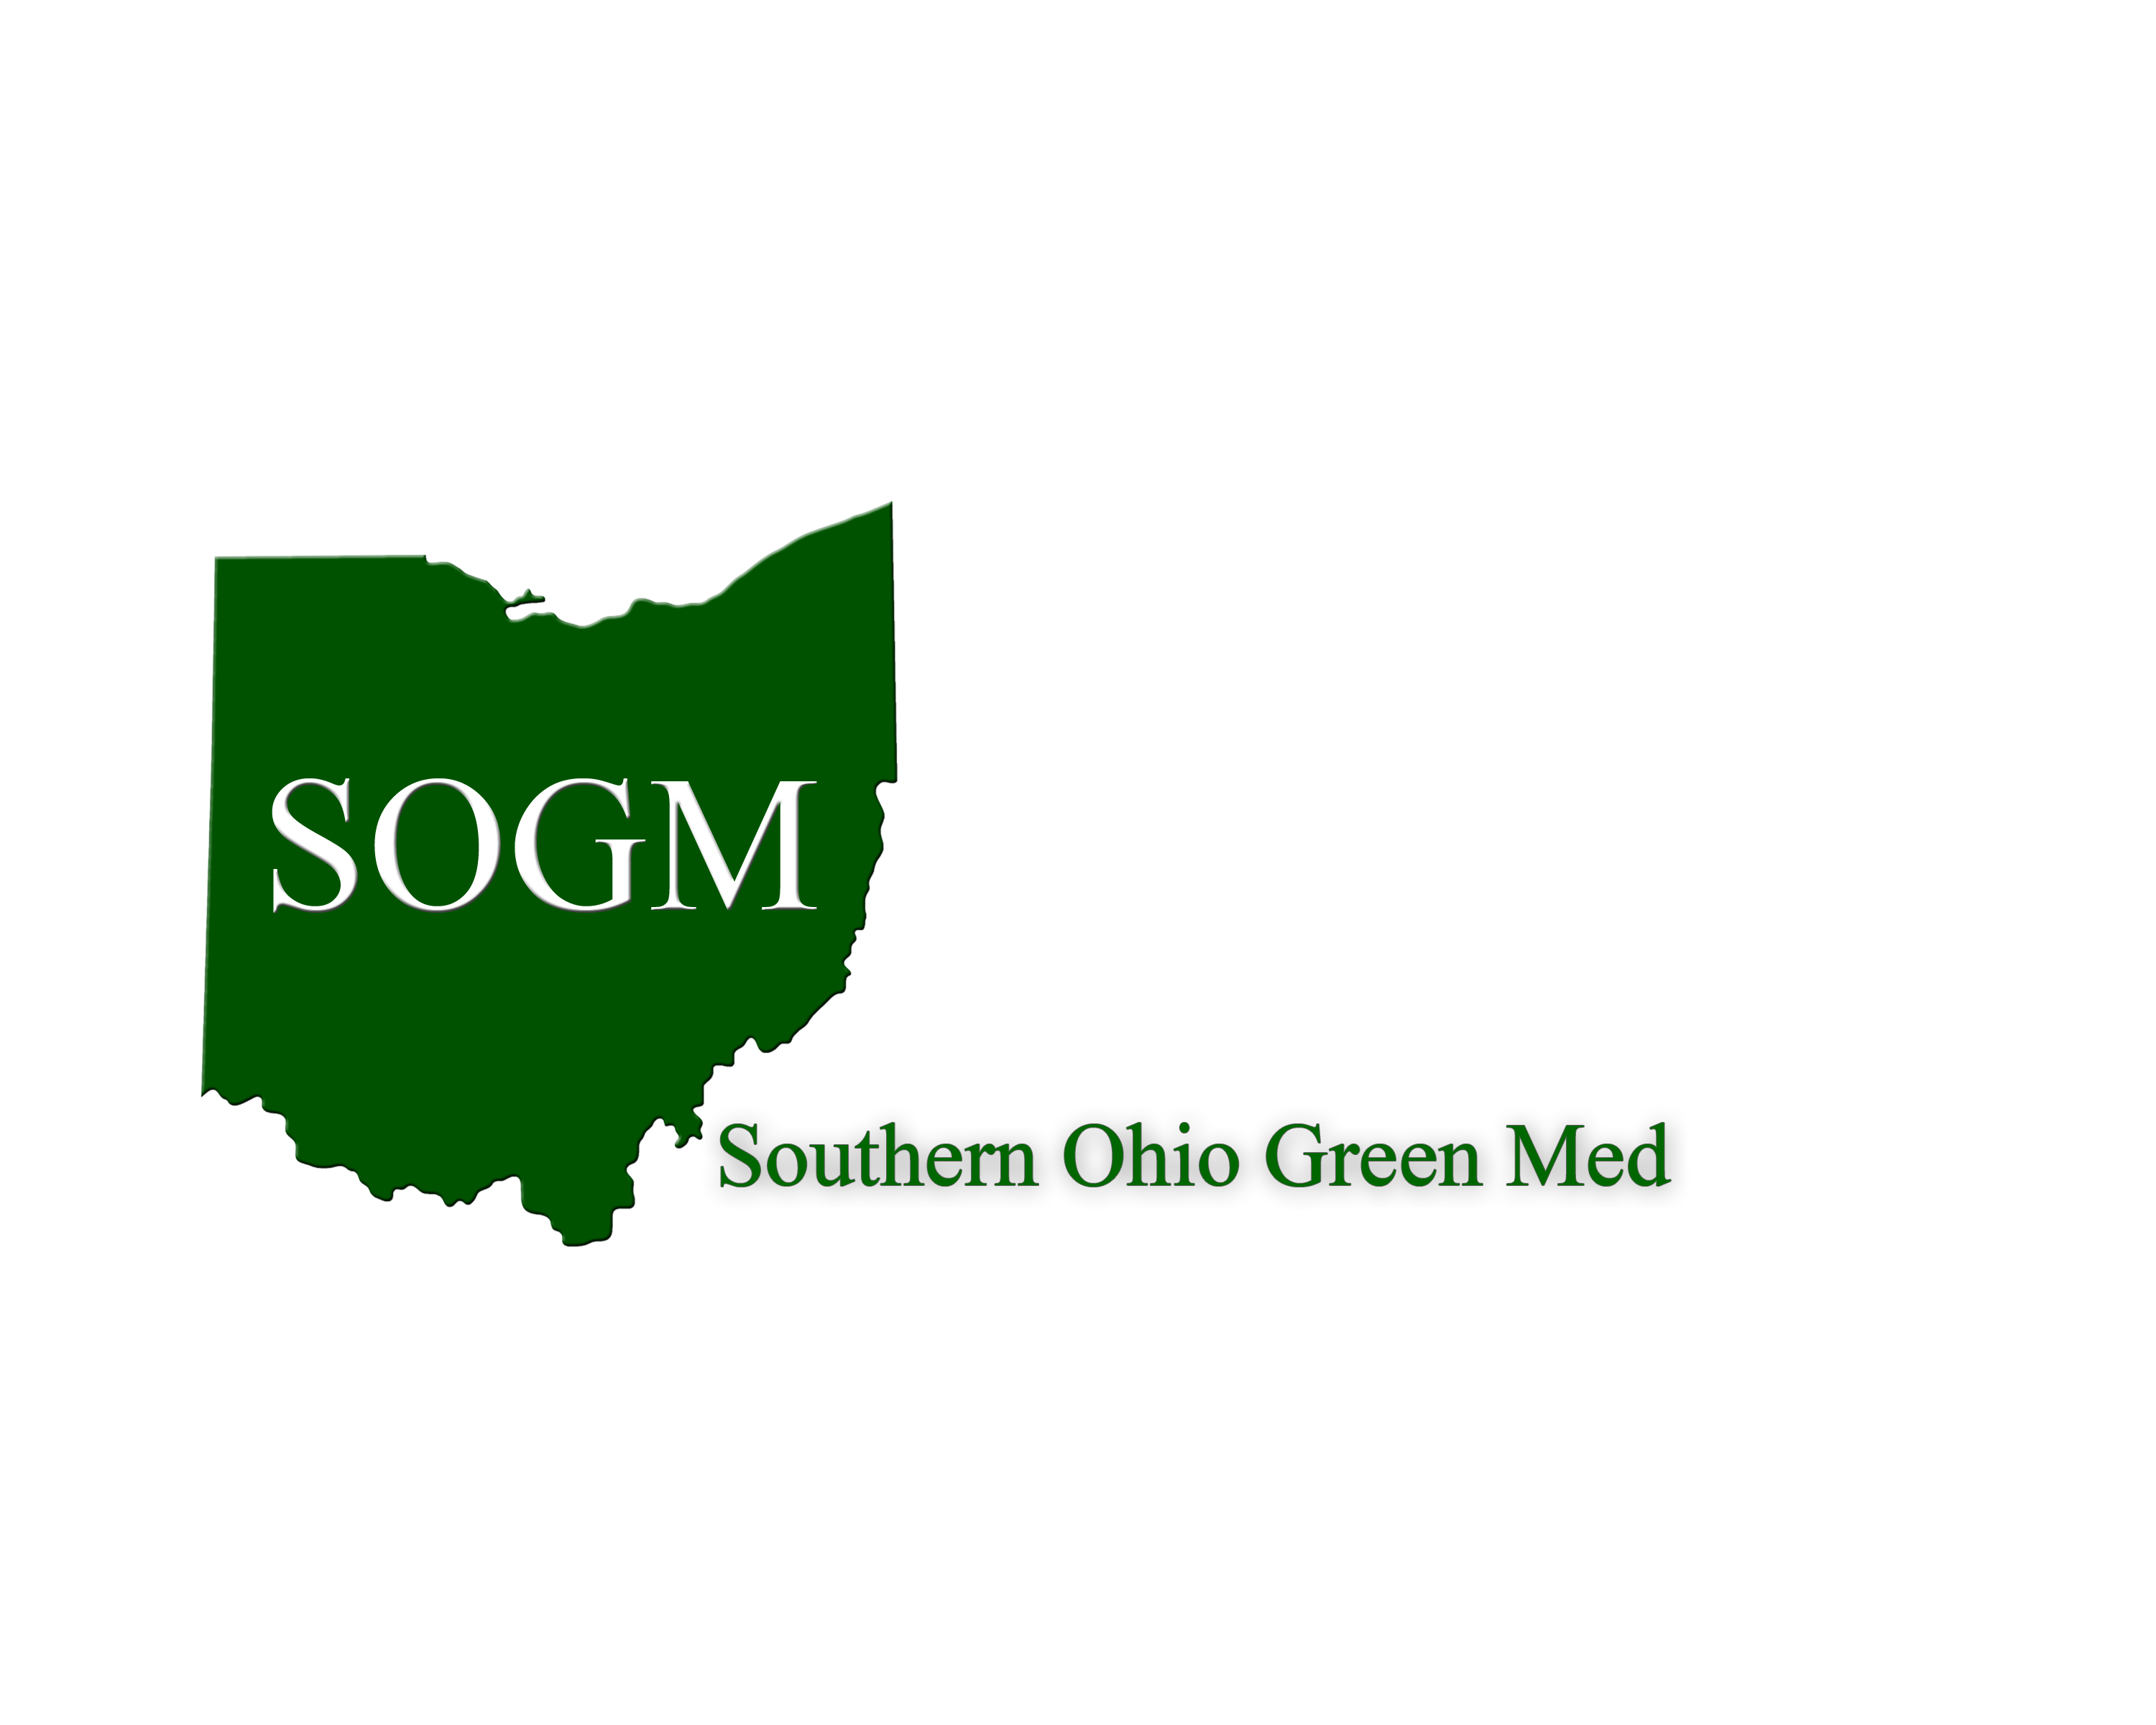 Southern Ohio Green Med